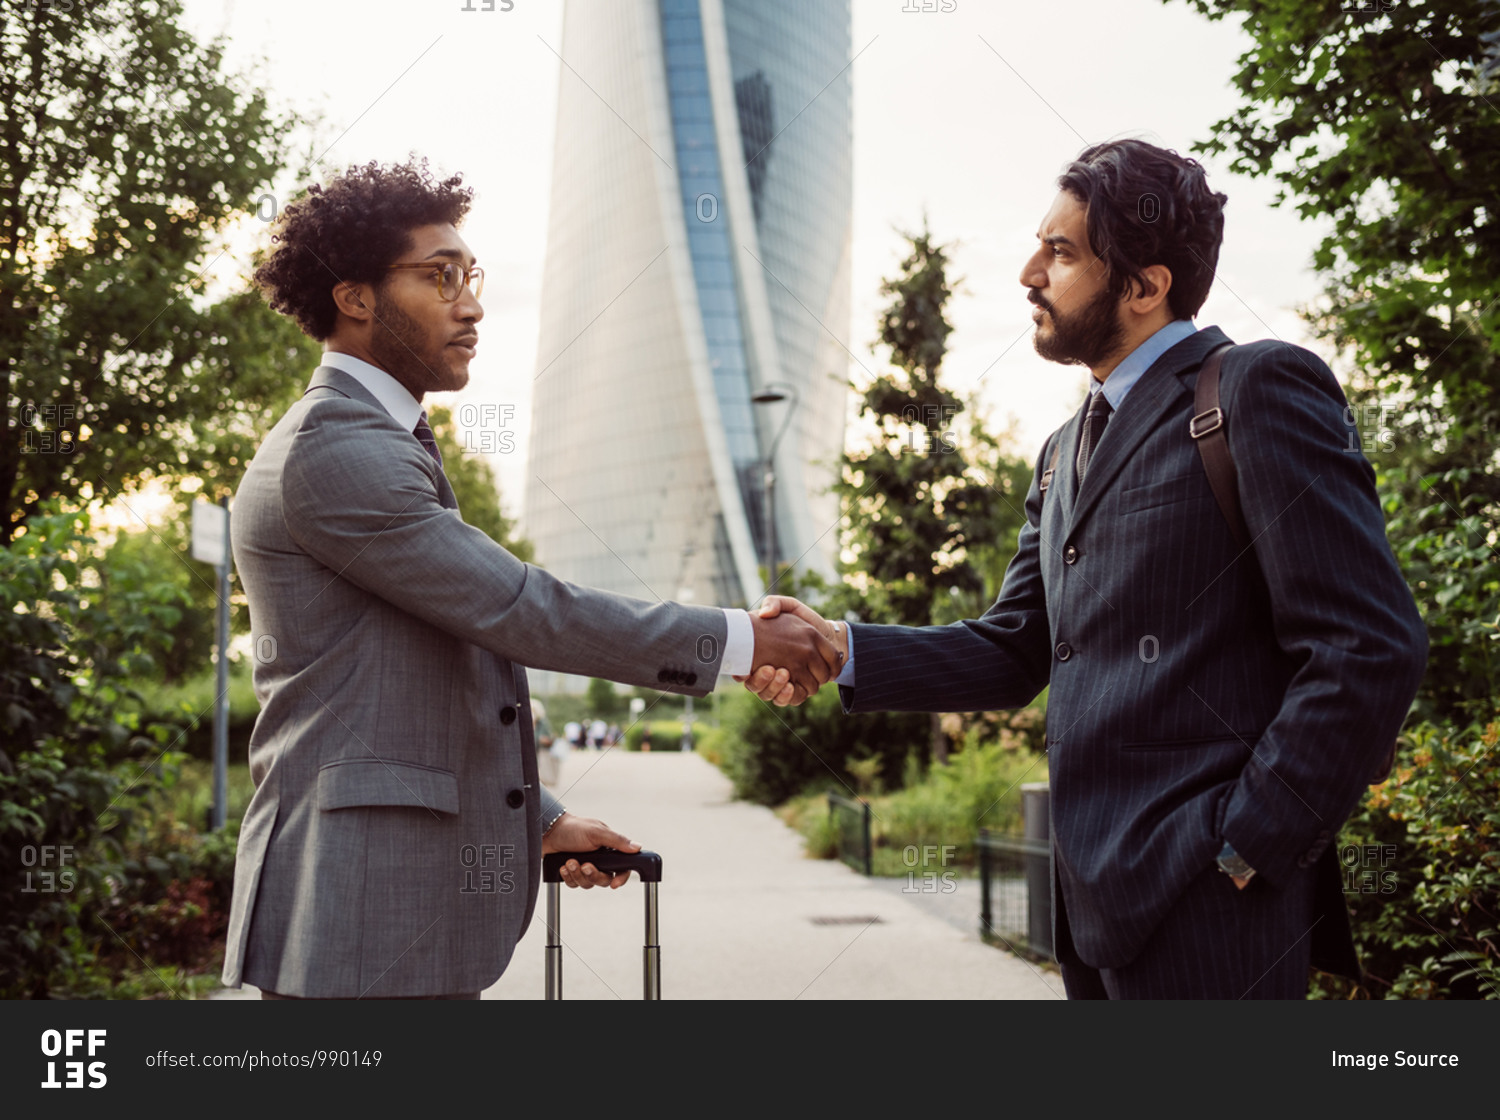 Two businessmen wearing suits standing outdoors, shaking hands.